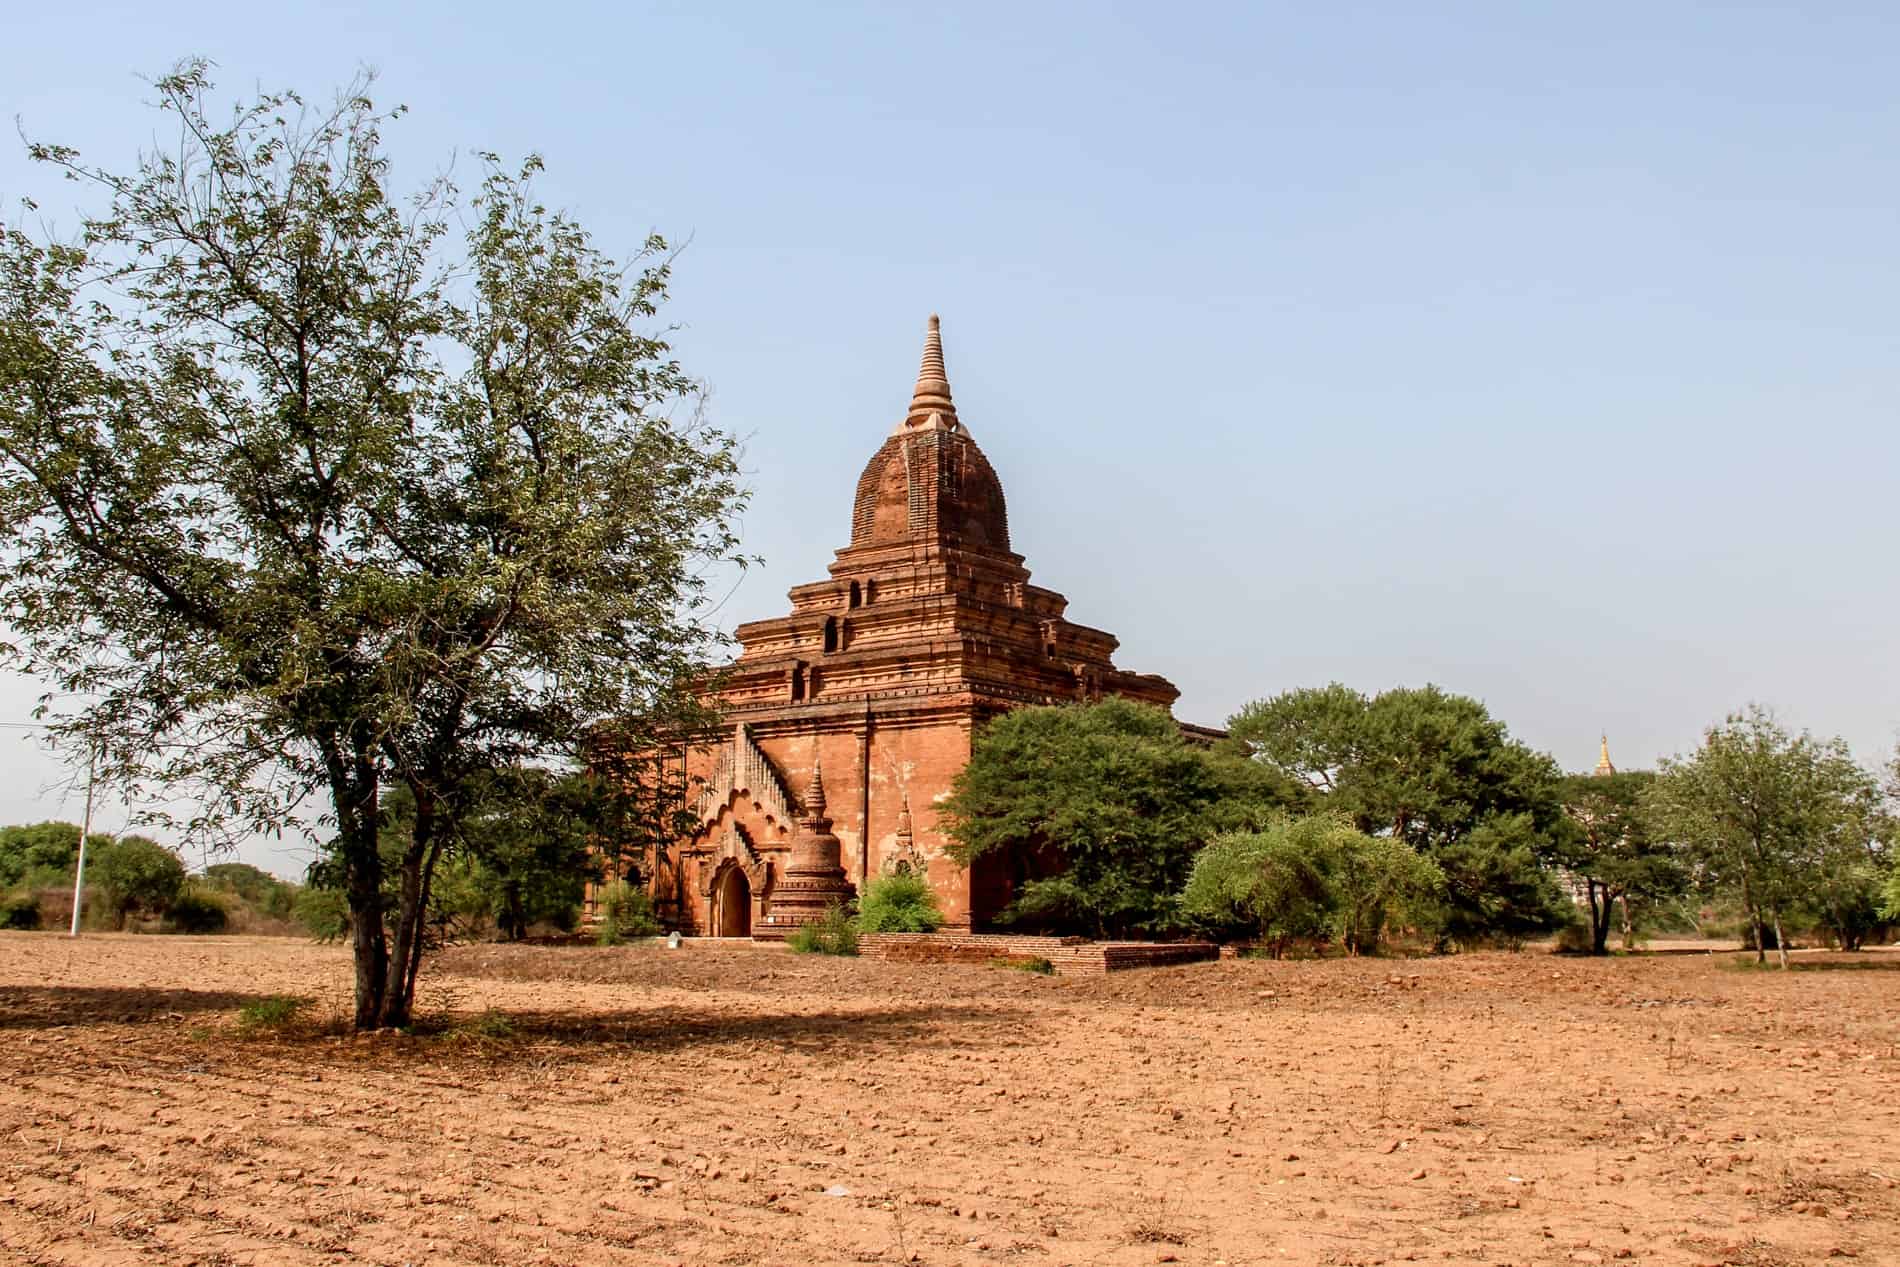 The four-tiered and spired orange brick Mee Nyein Gone Temple in Old Bagan, Myanmar. 